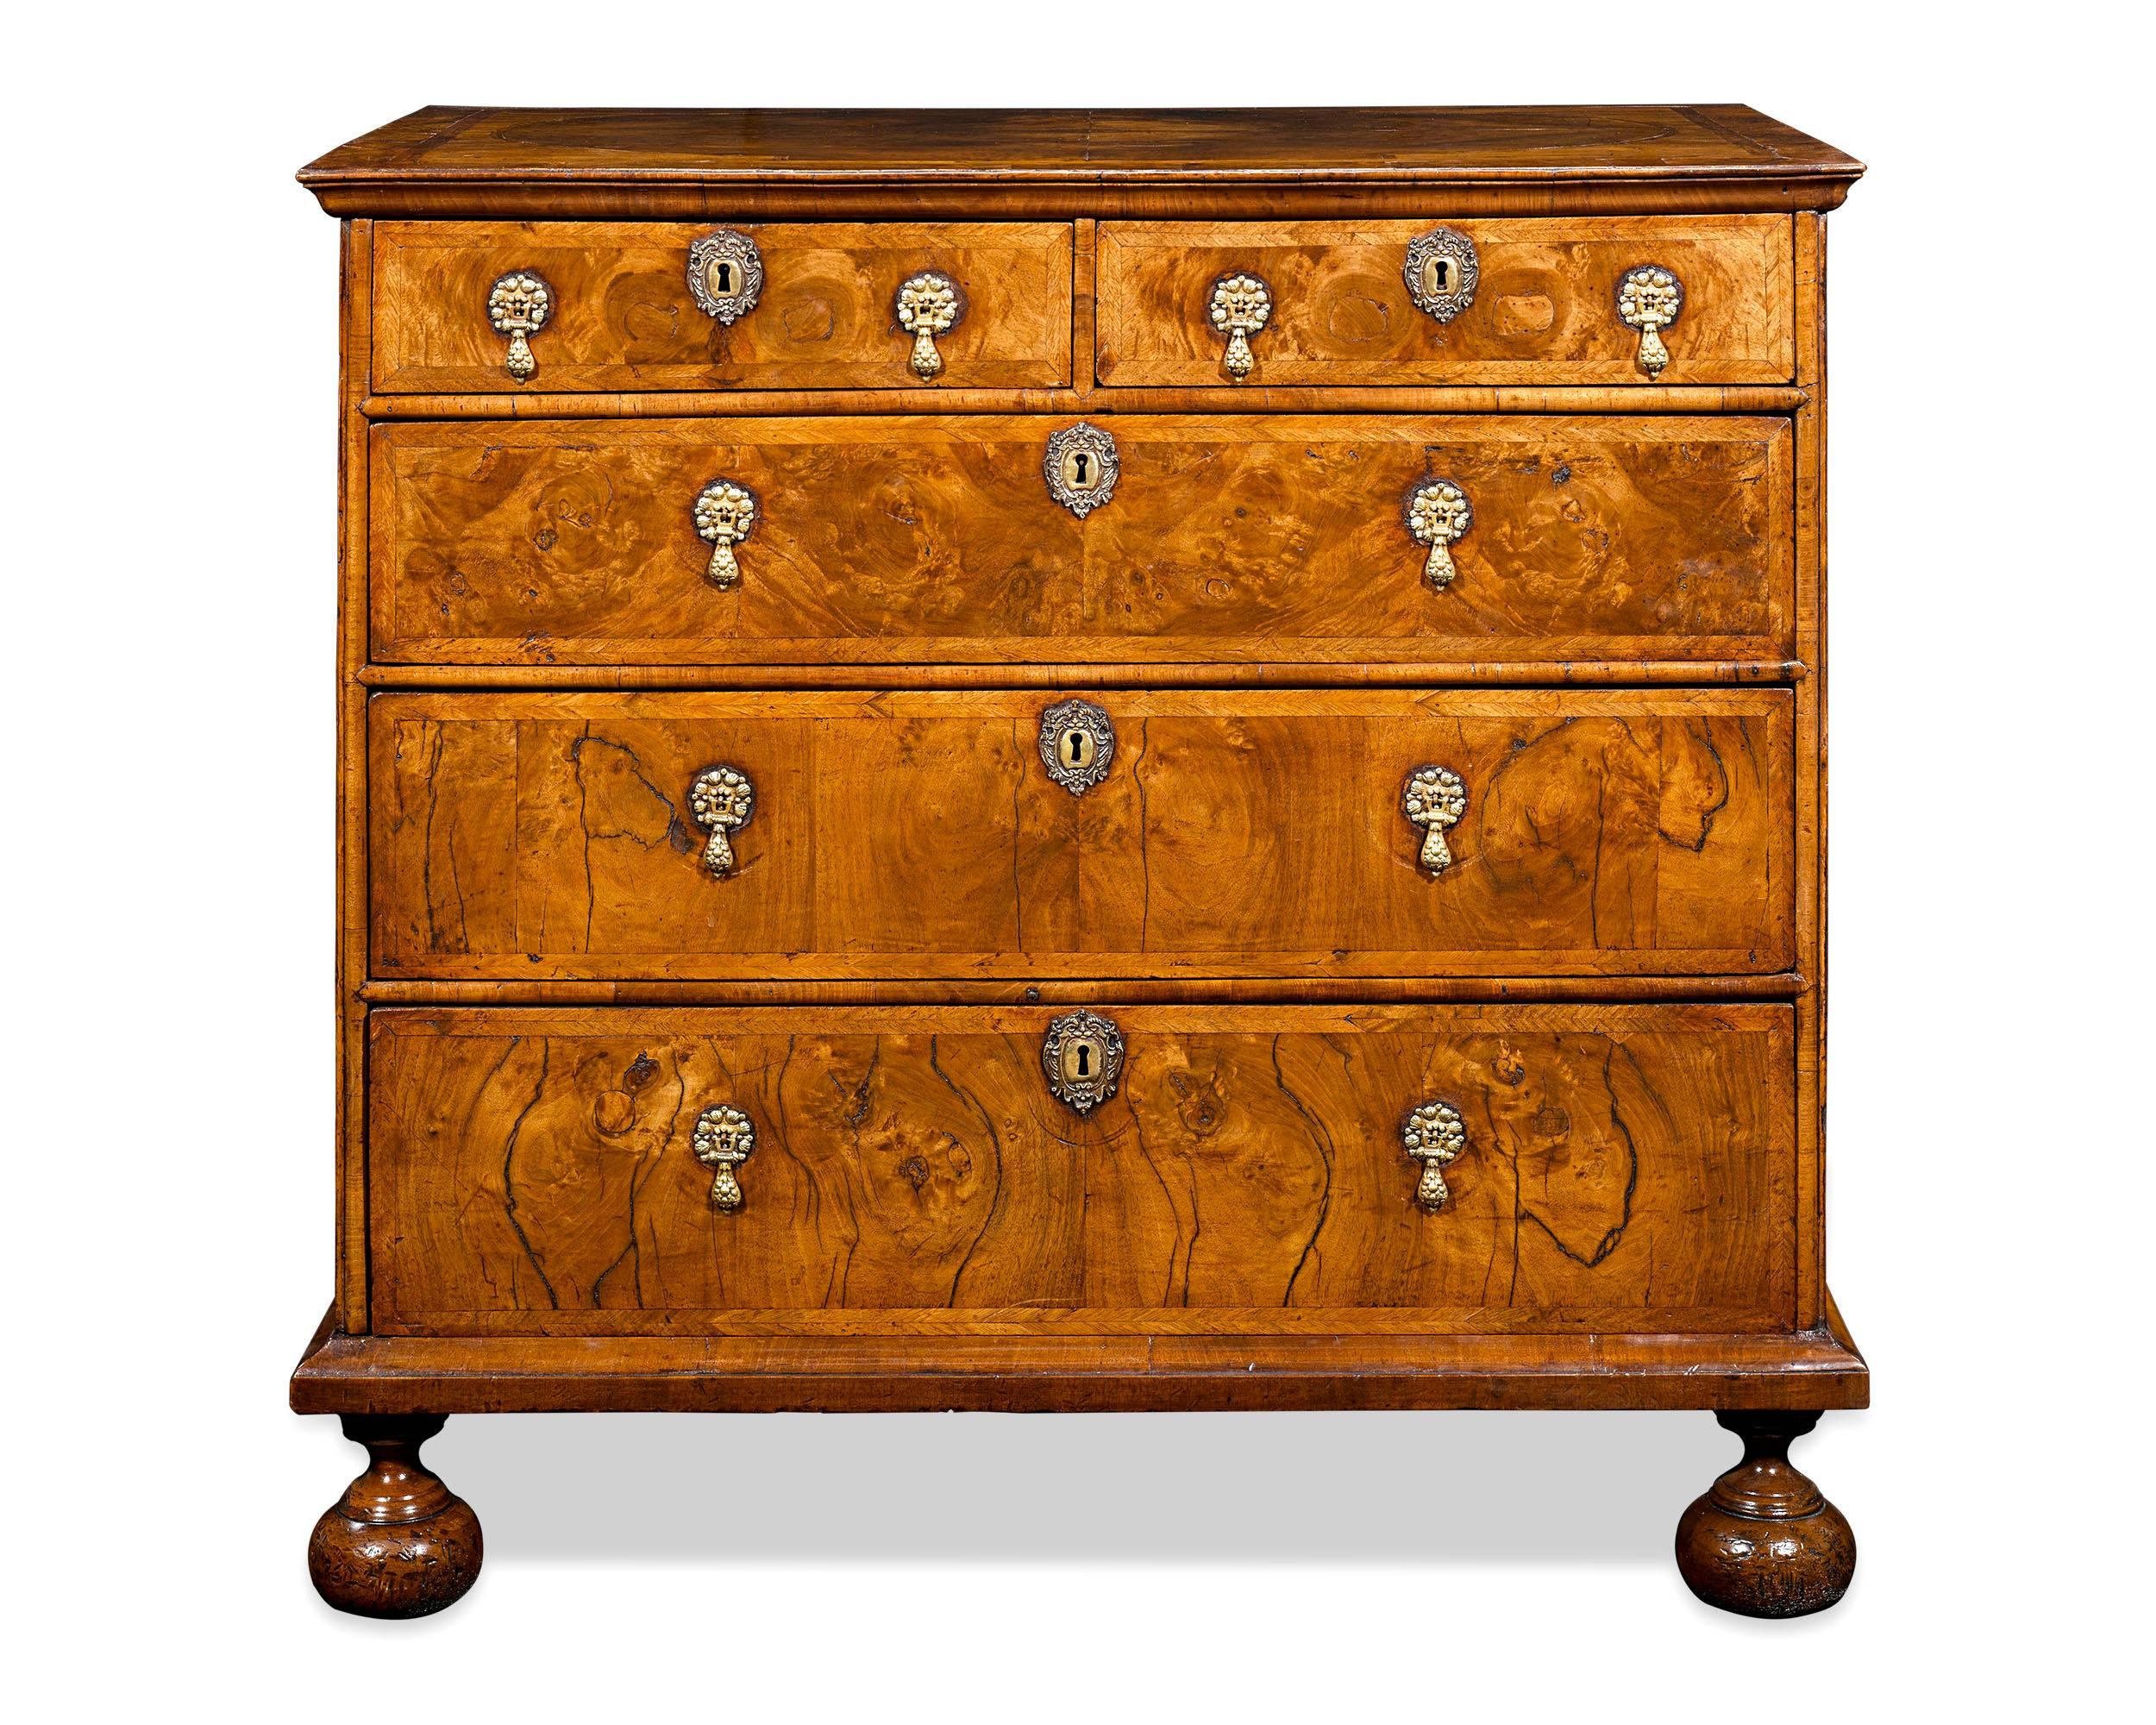 This magnificent and extremely rare burl walnut veneered chest dates to the William and Mary period. Light dances across the veneers have aged to exhibit a rich and warm patina. Elevated on bun feet, the chest's exceptional design also incorporates